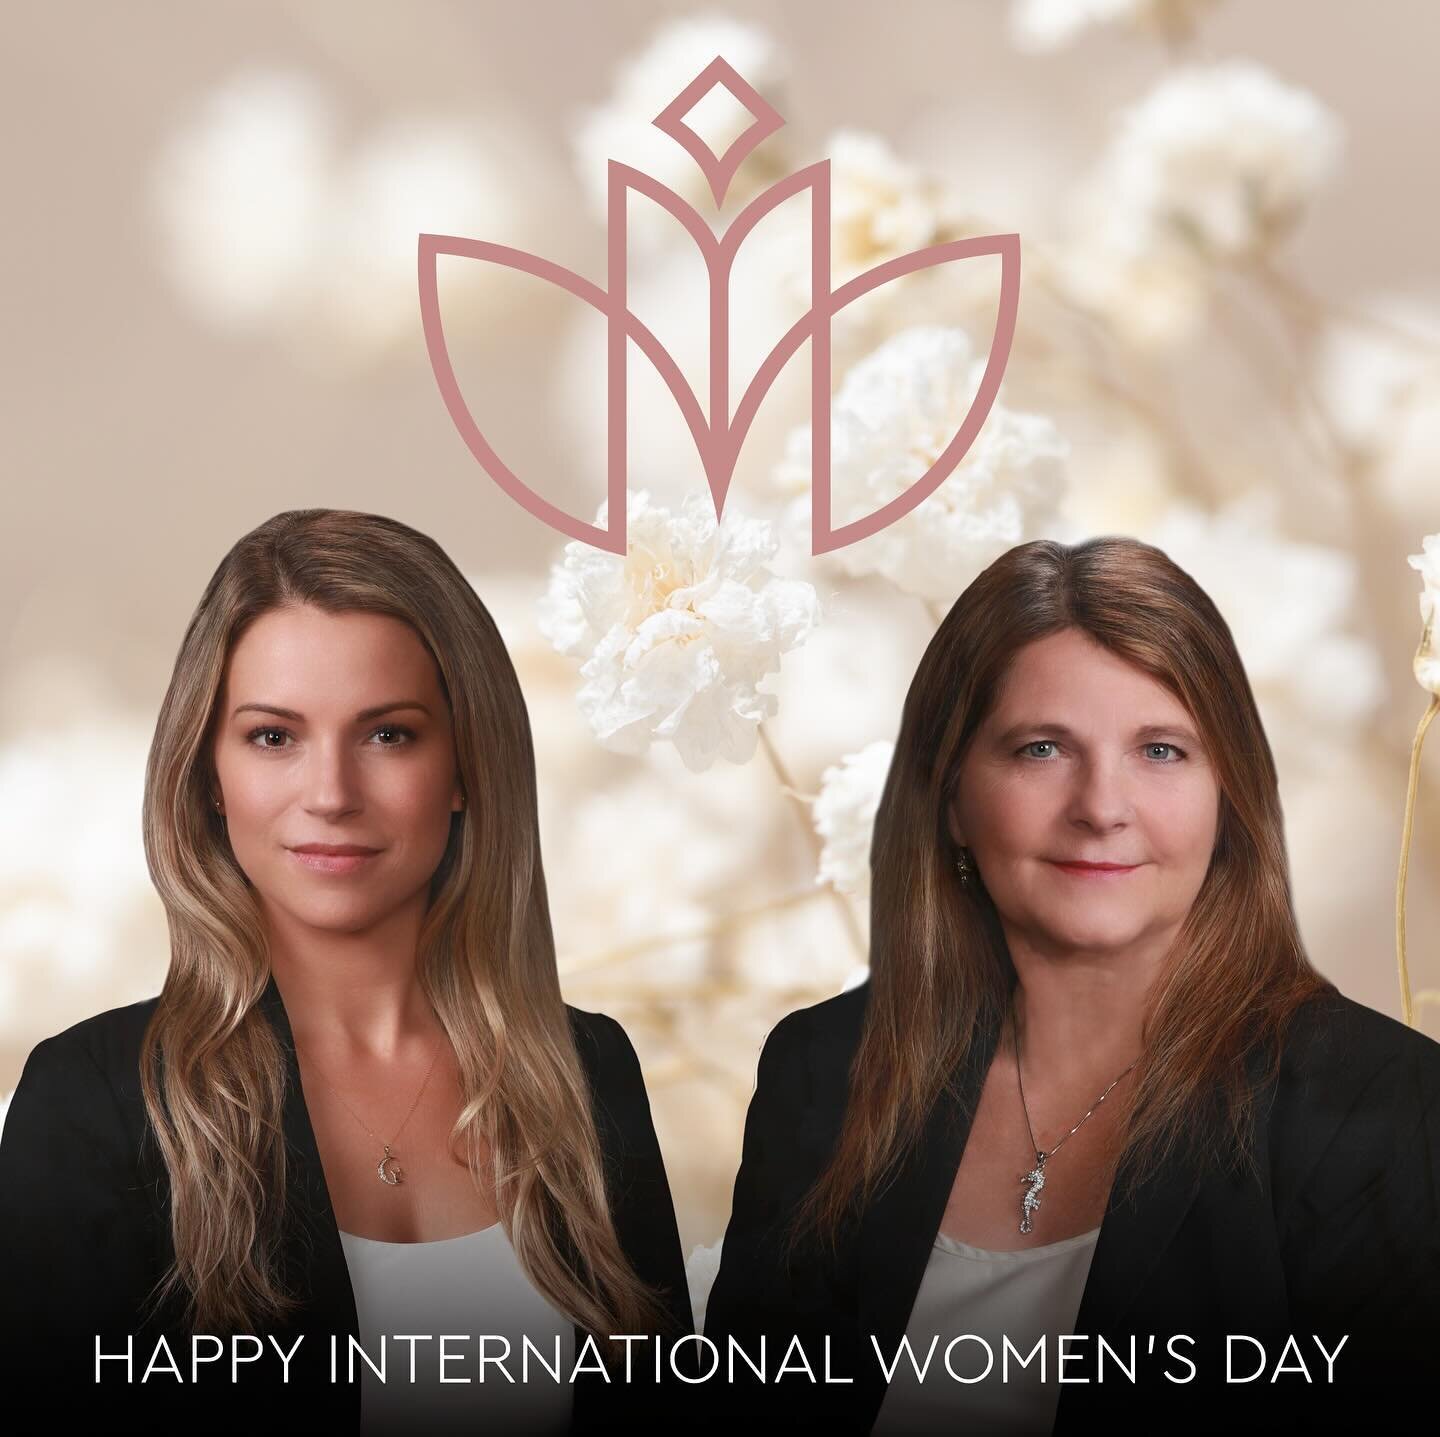 Happy International Women&rsquo;s Day from all of us at The Mills Residences. #internationalwomensday #novascotia #halifax #springgardenarea #life #style